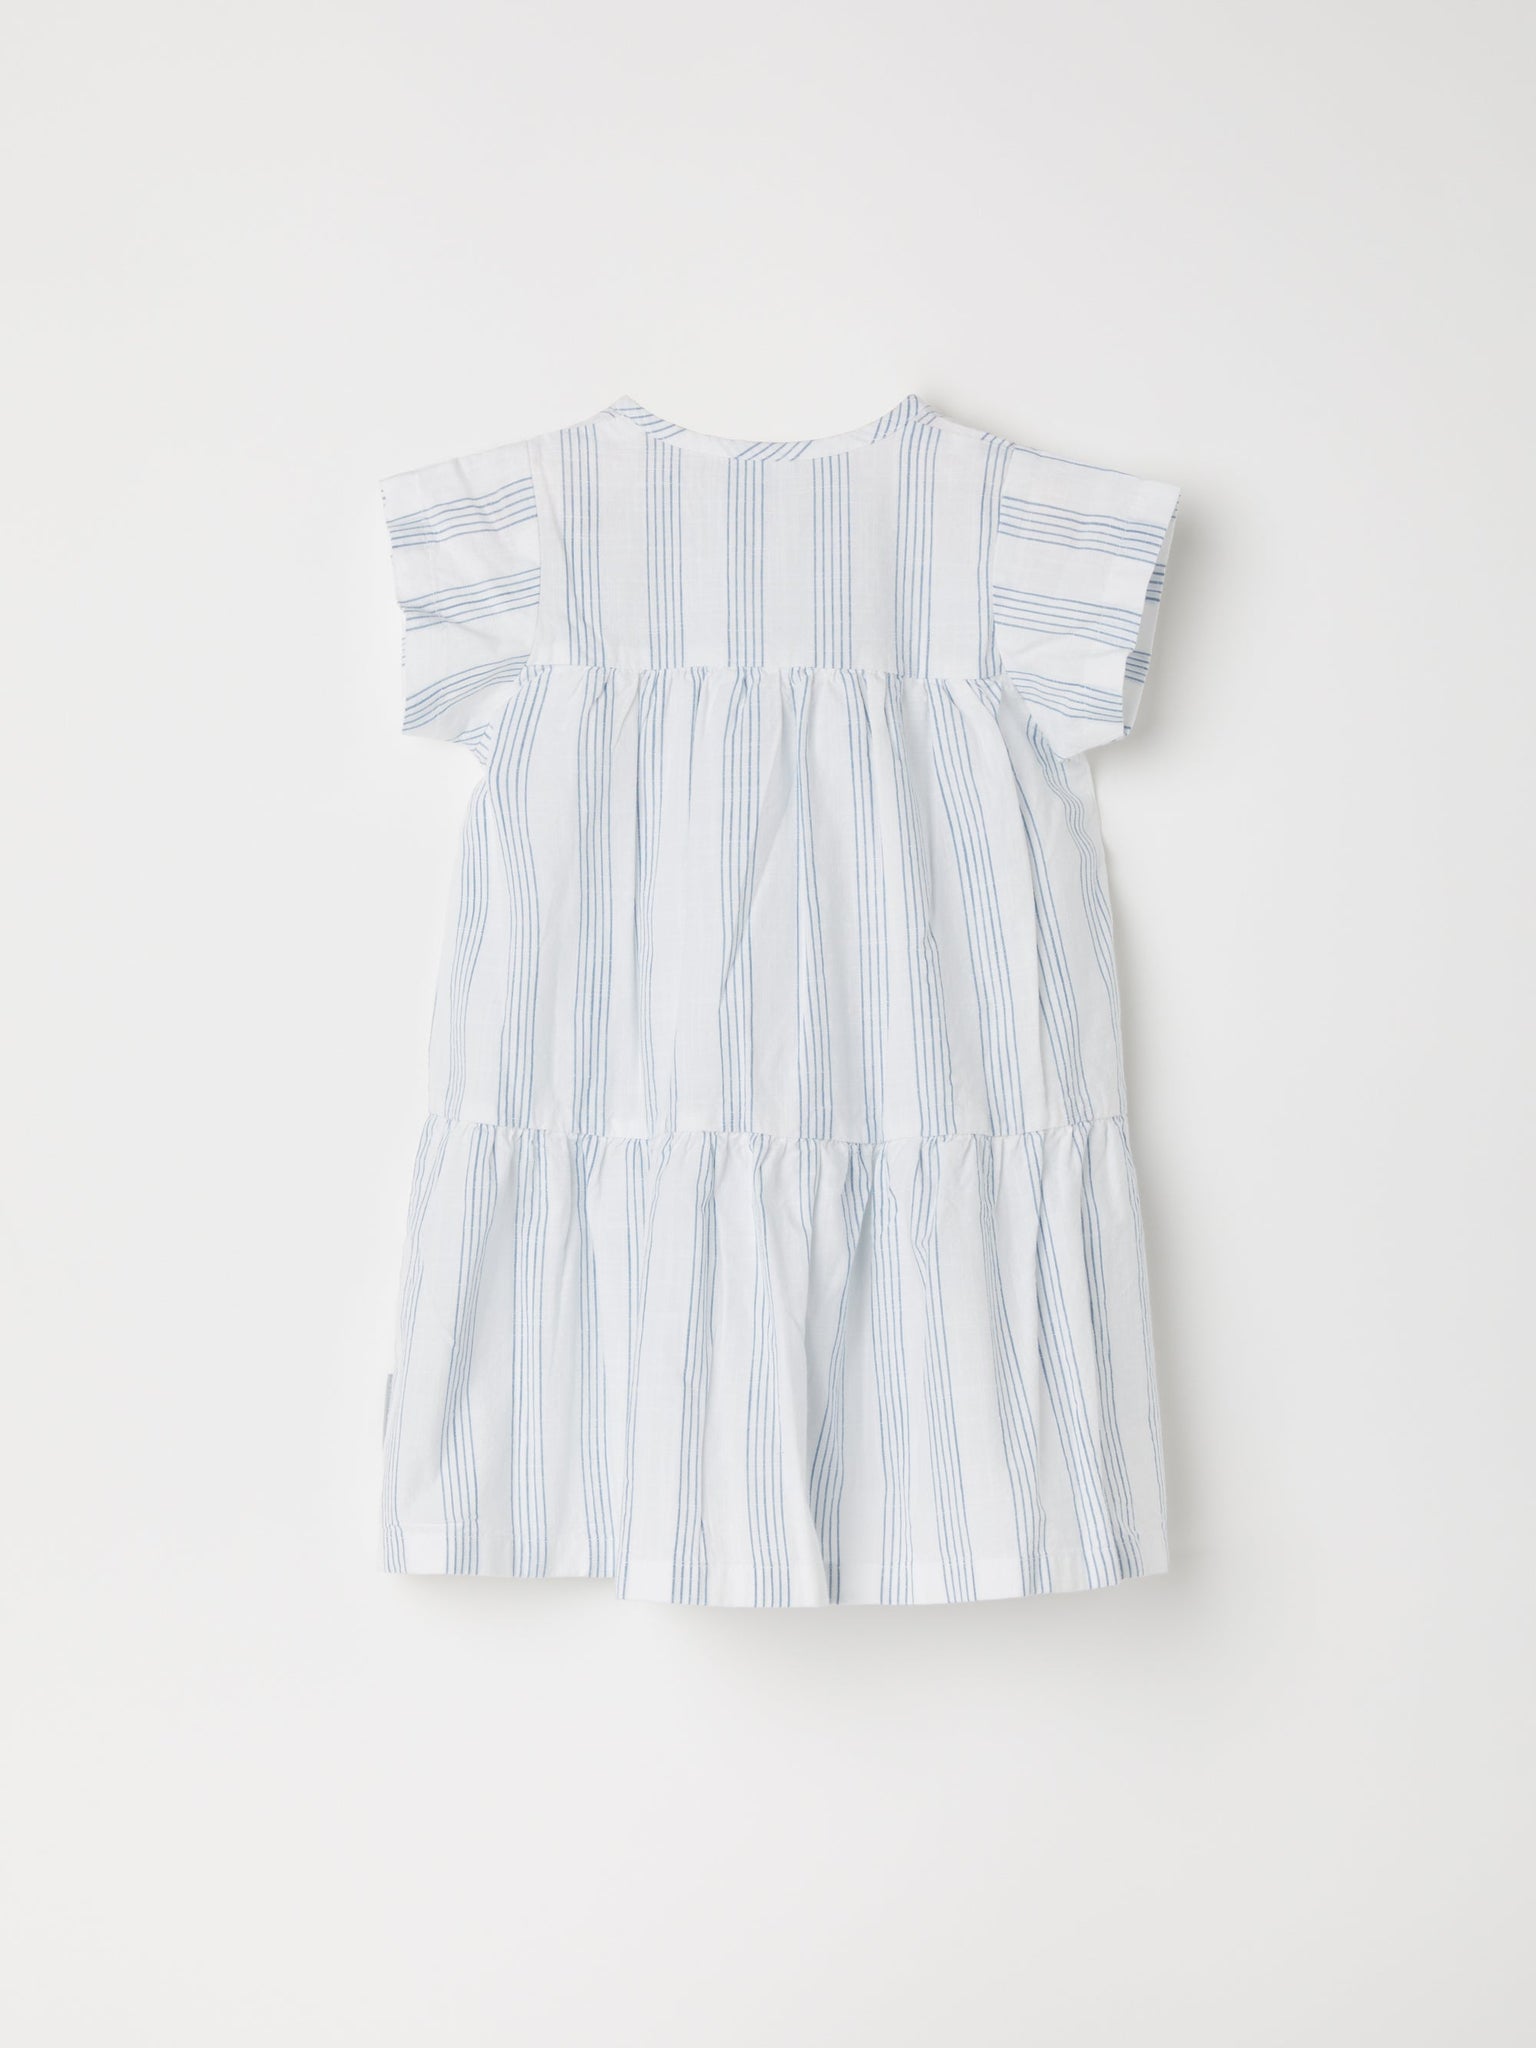 Striped Organic Cotton Baby Dress from the Polarn O. Pyret baby collection. Ethically produced kids clothing.